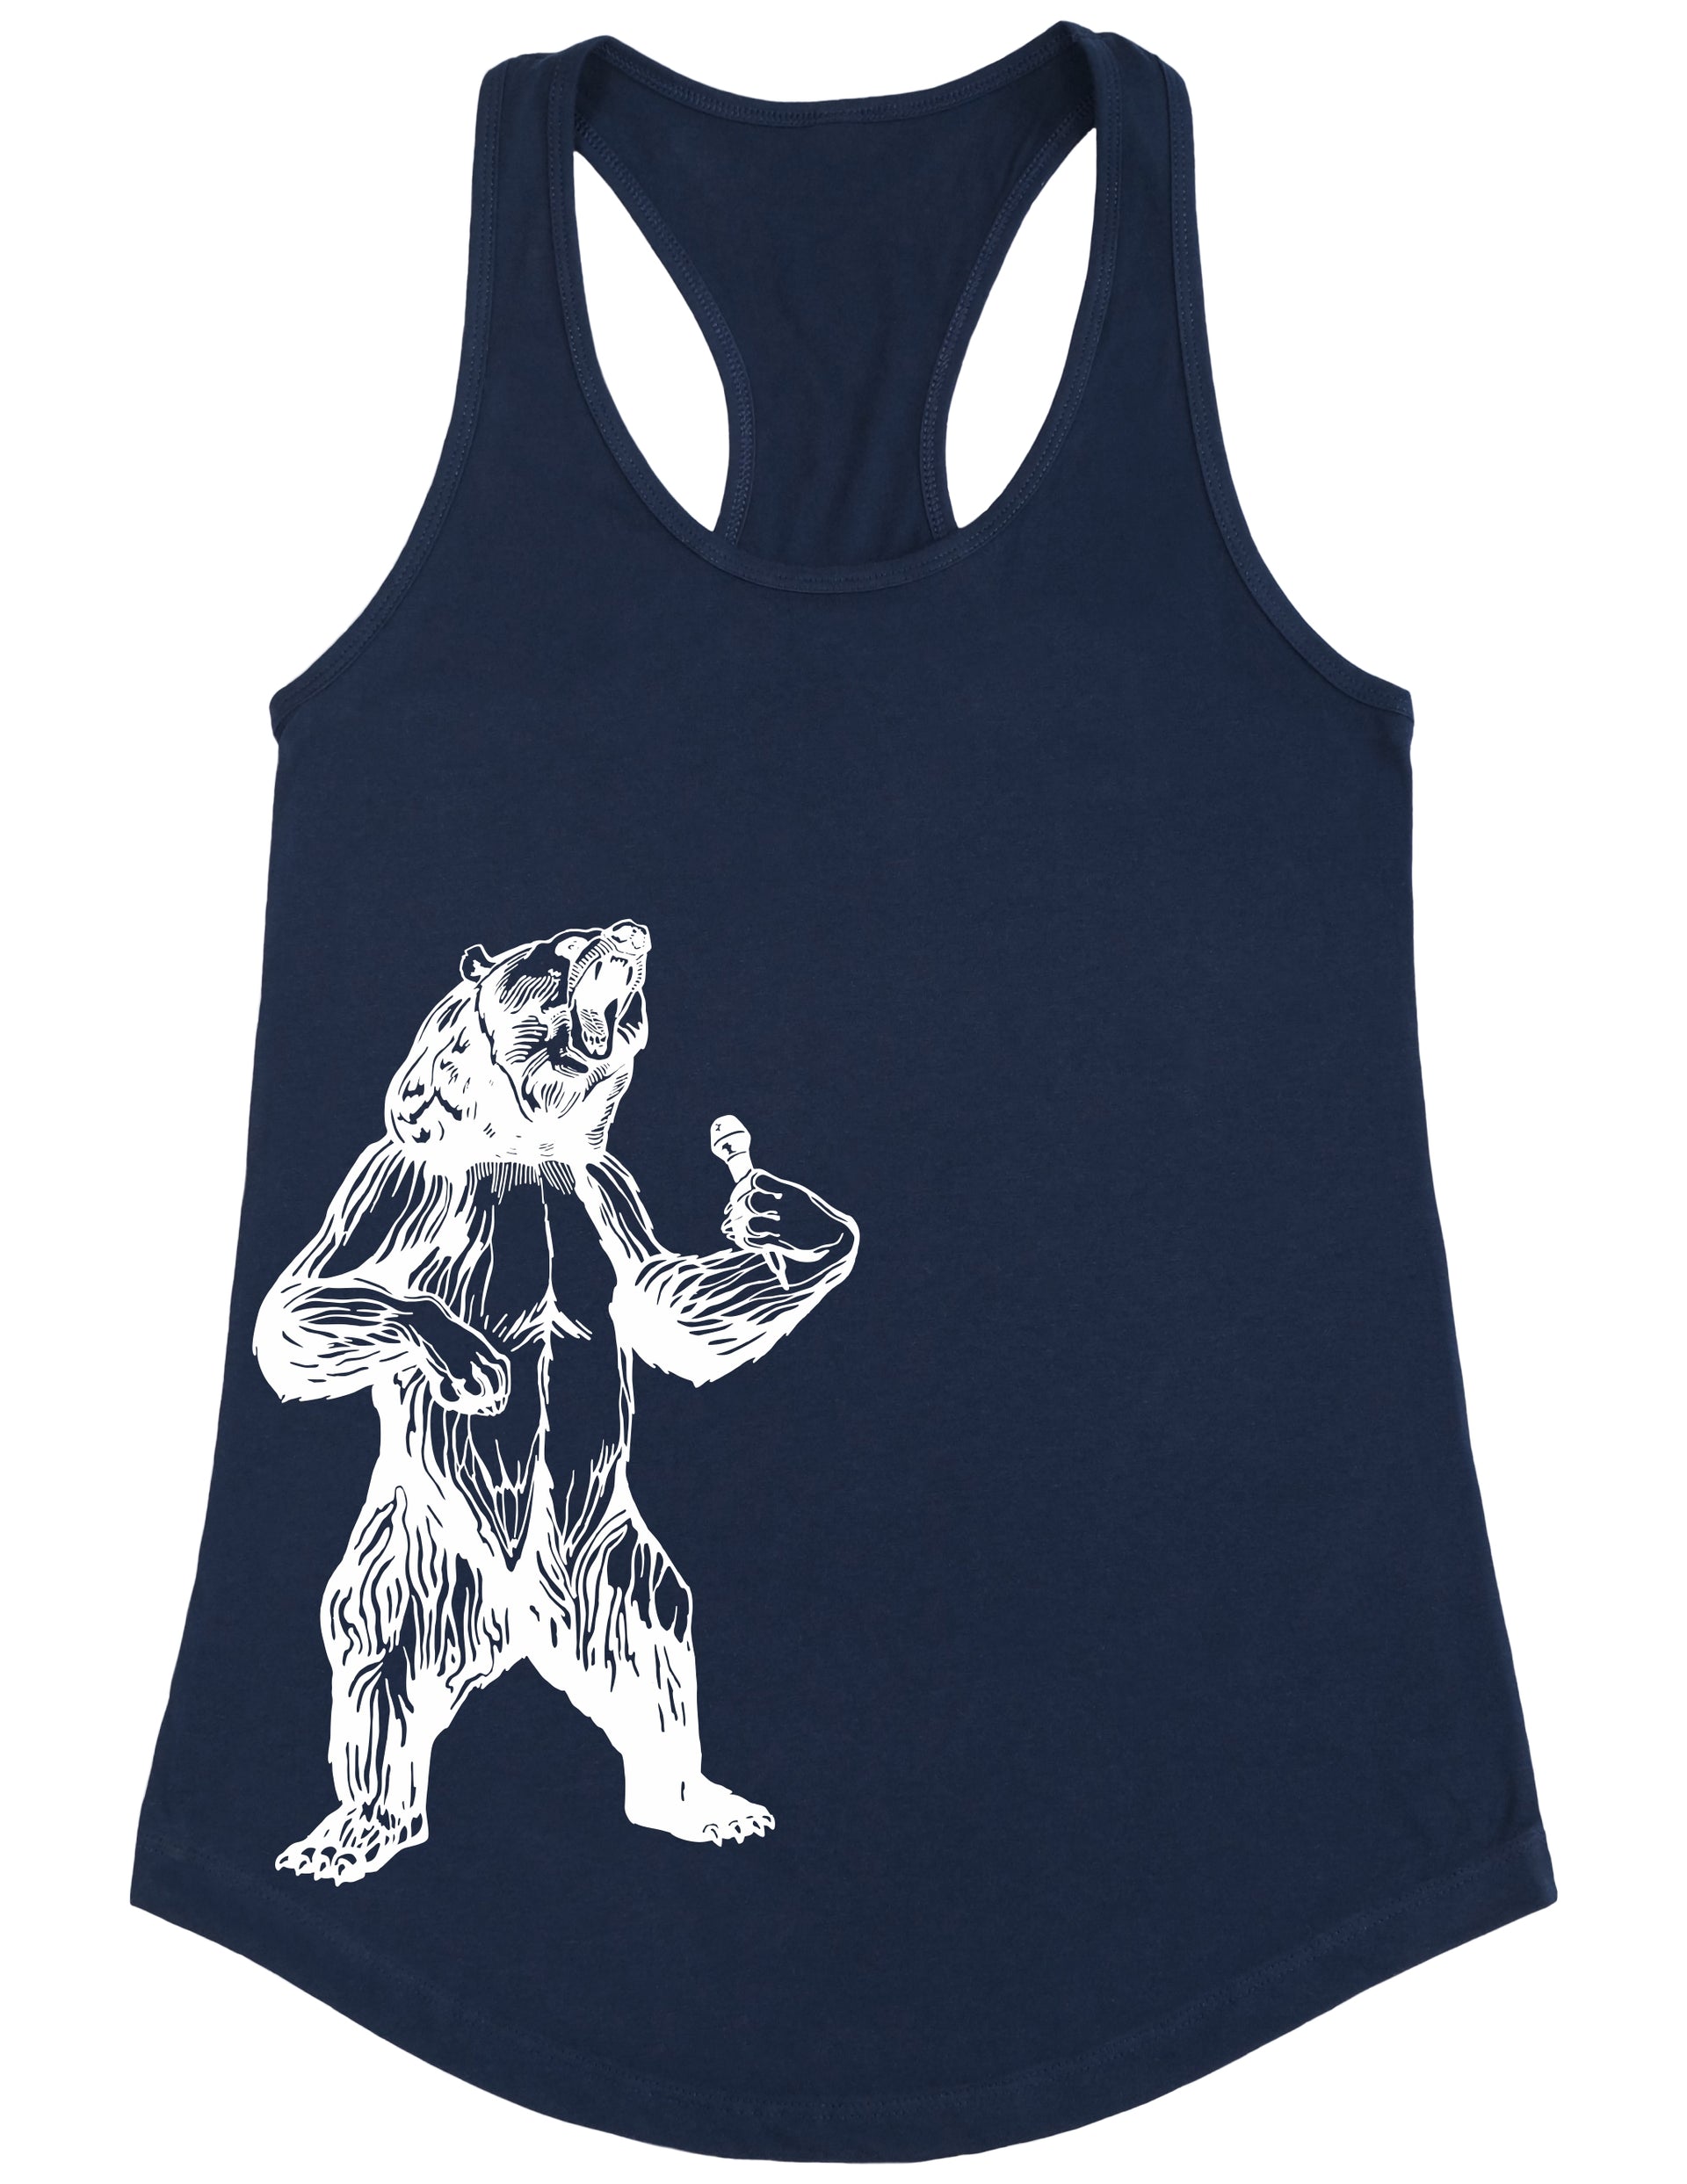 bear trying to sing karaoke seembo women poly cotton tank top navy color side print